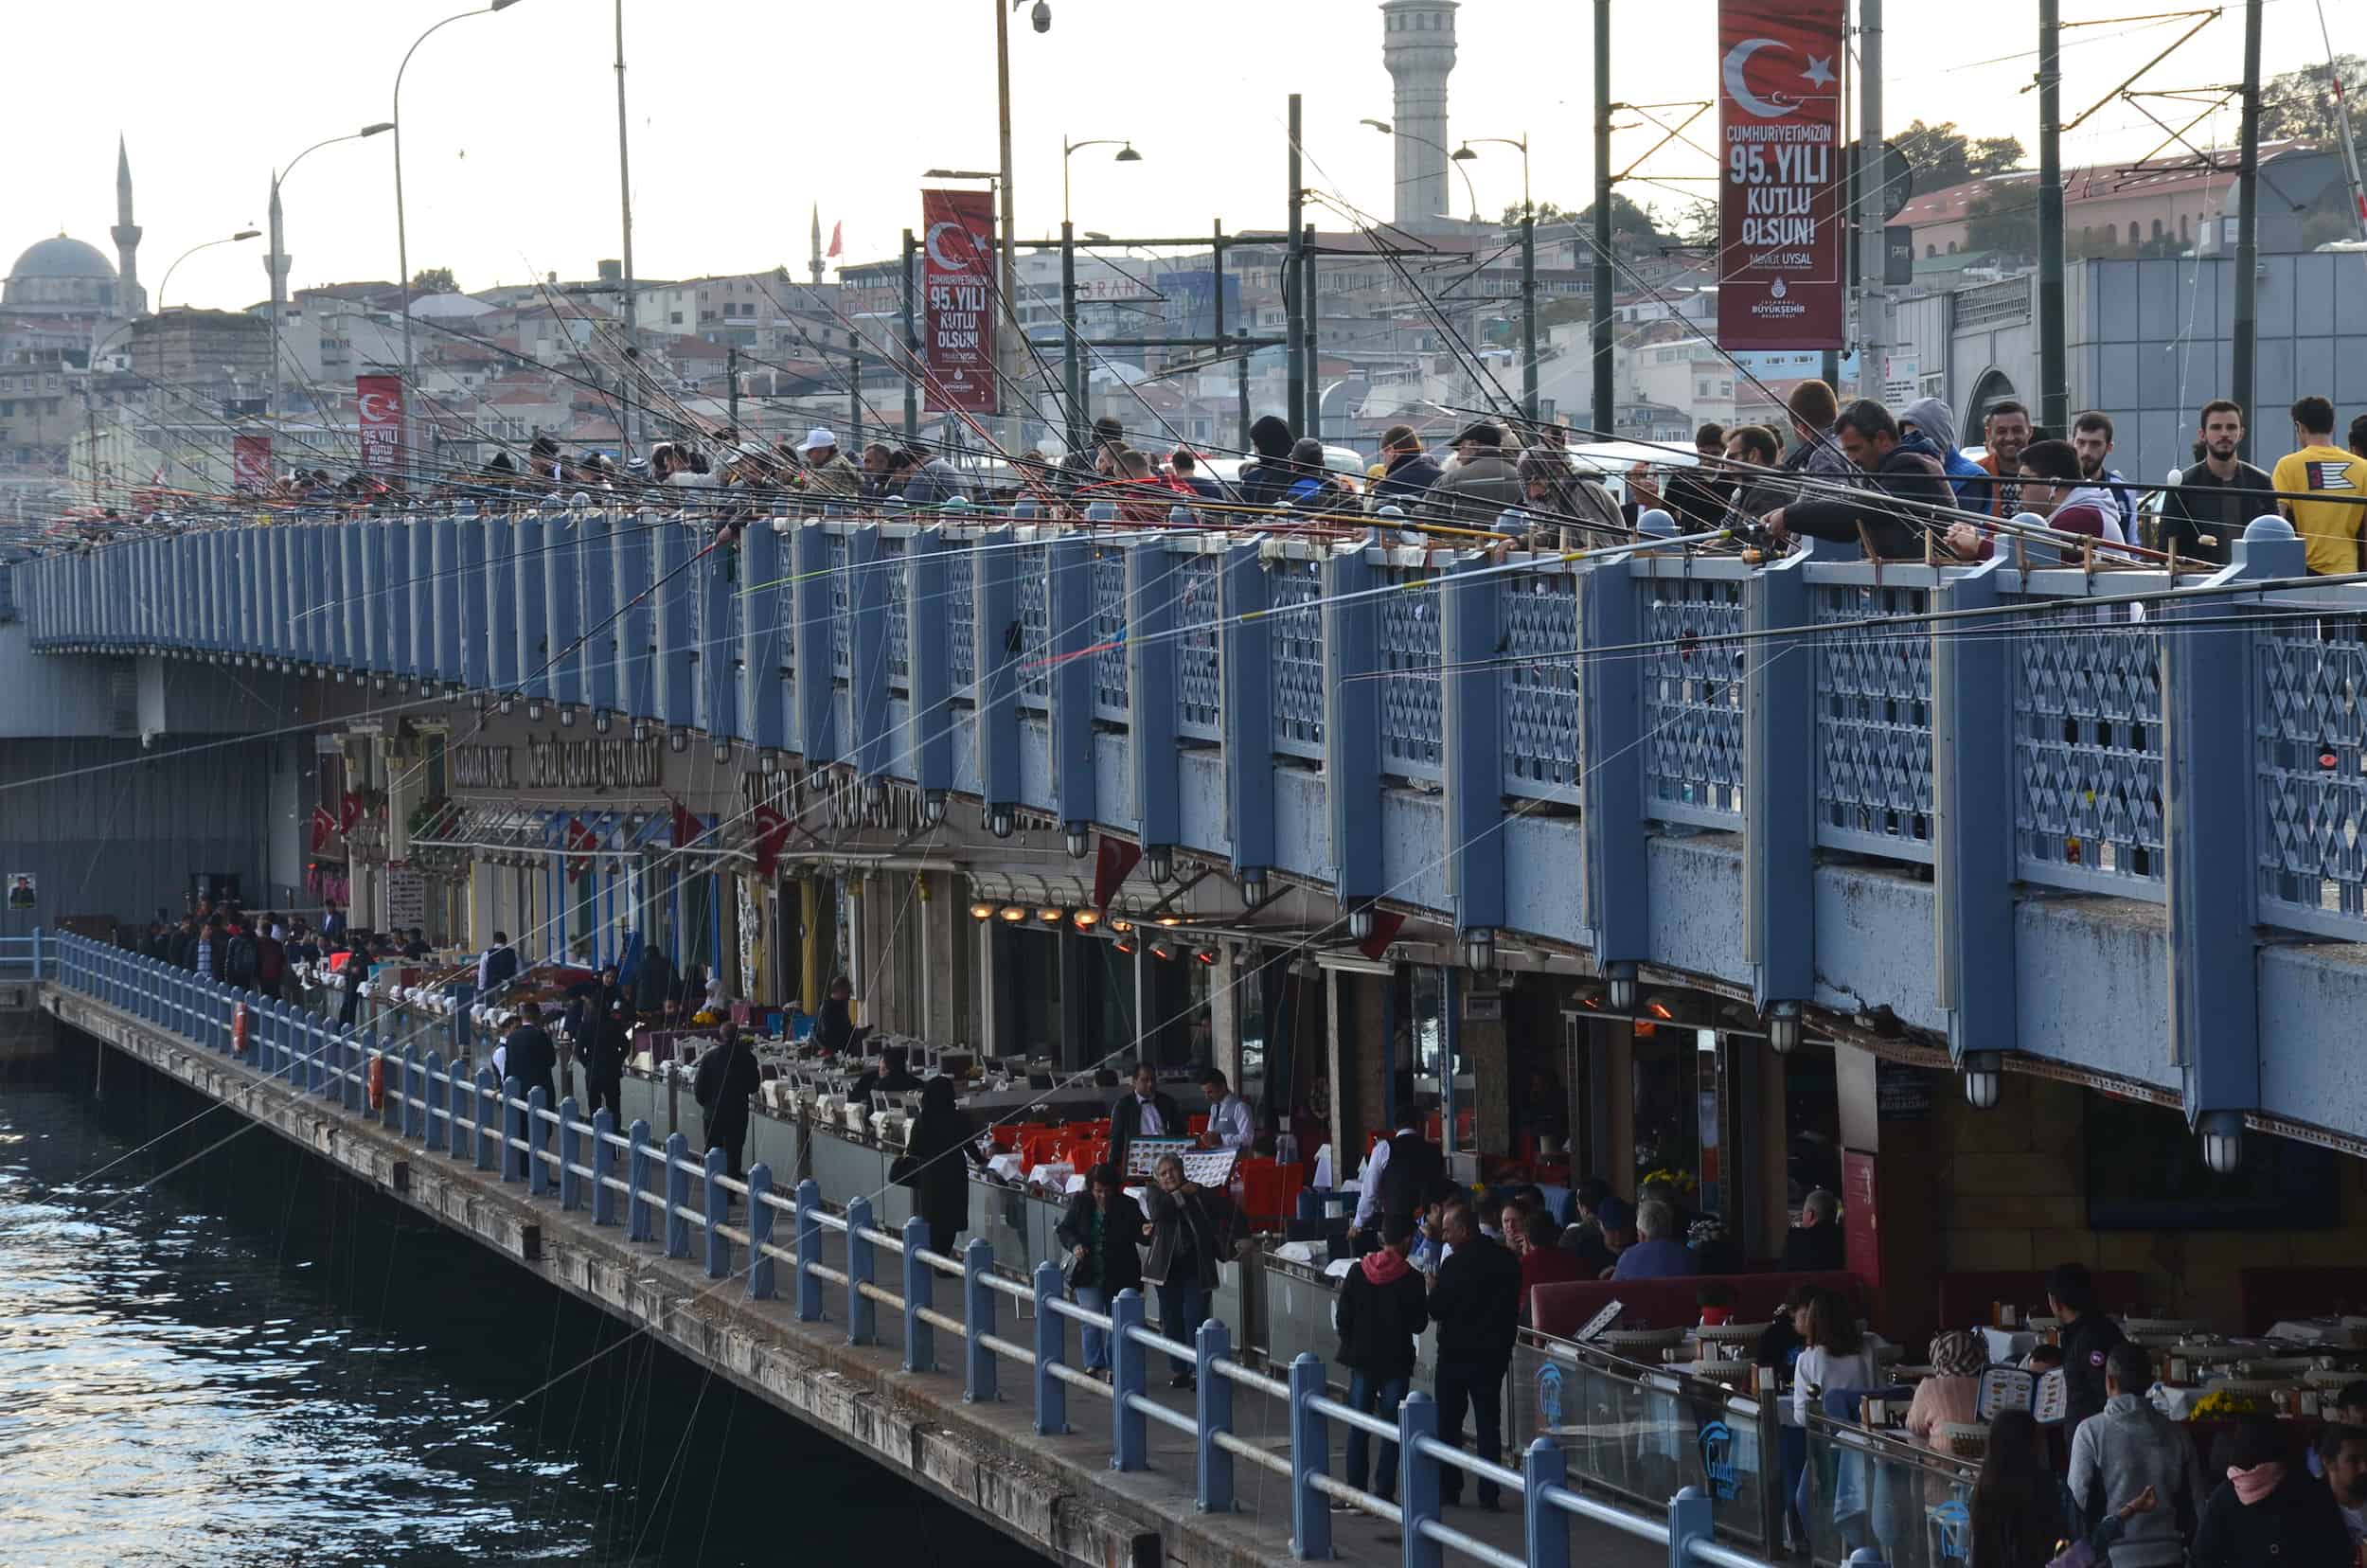 The two levels on the Galata Bridge in Istanbul, Turkey